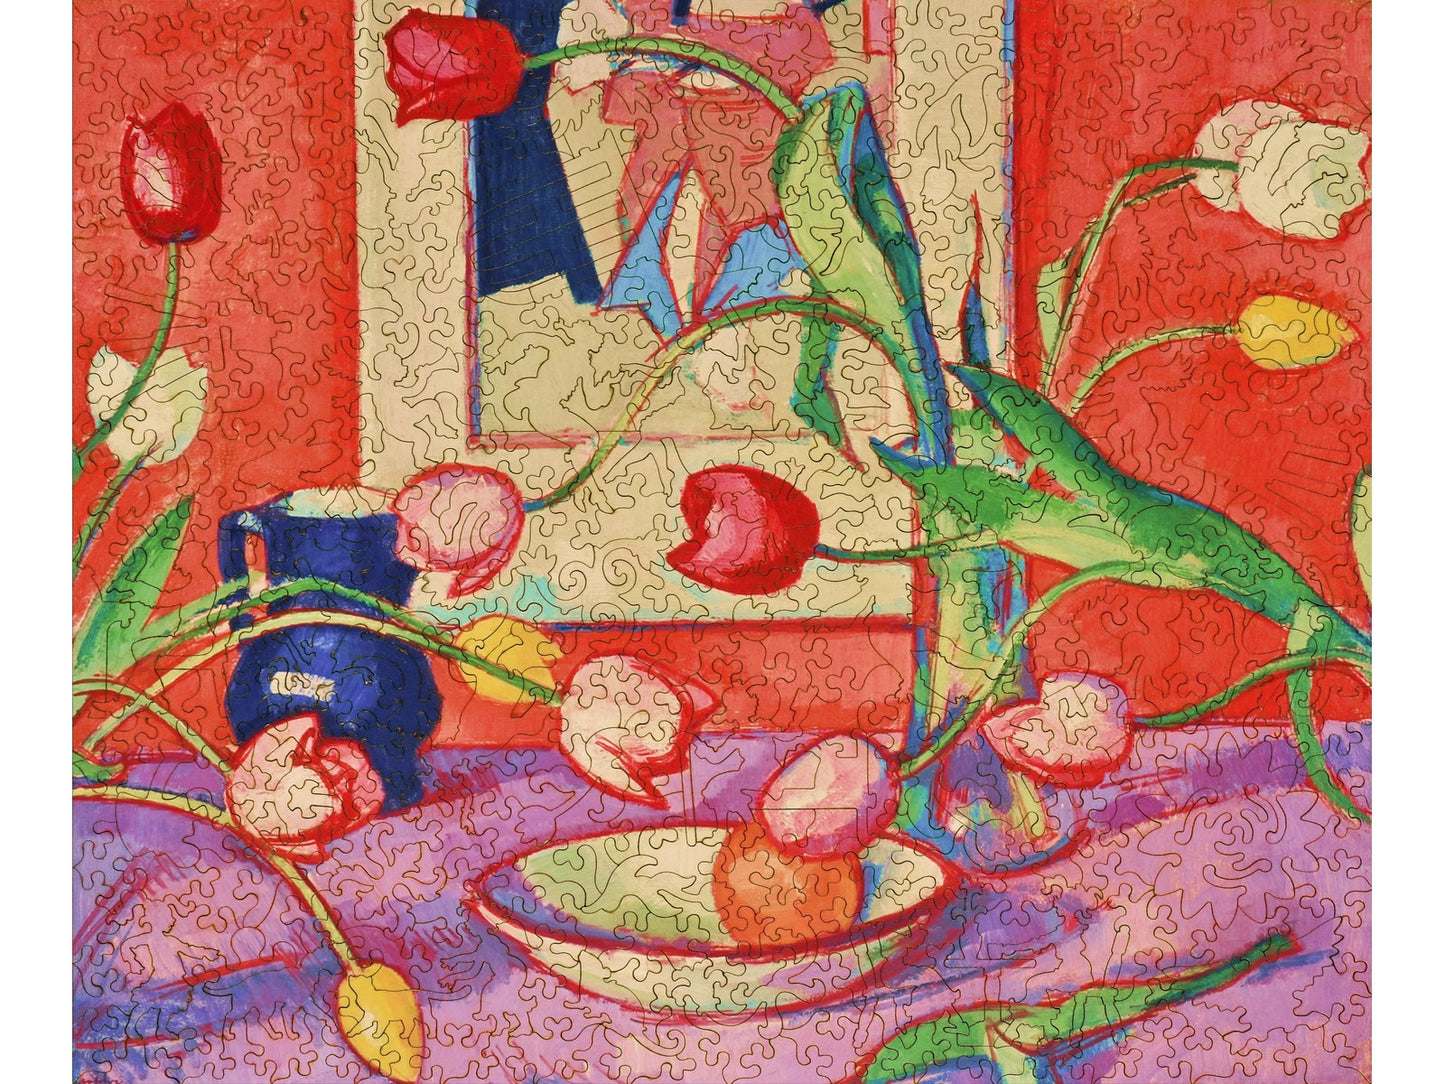 The front of the puzzle, Tulips - The Blue Jug, which shows a table with a vase of flowers and a blue pitcher.